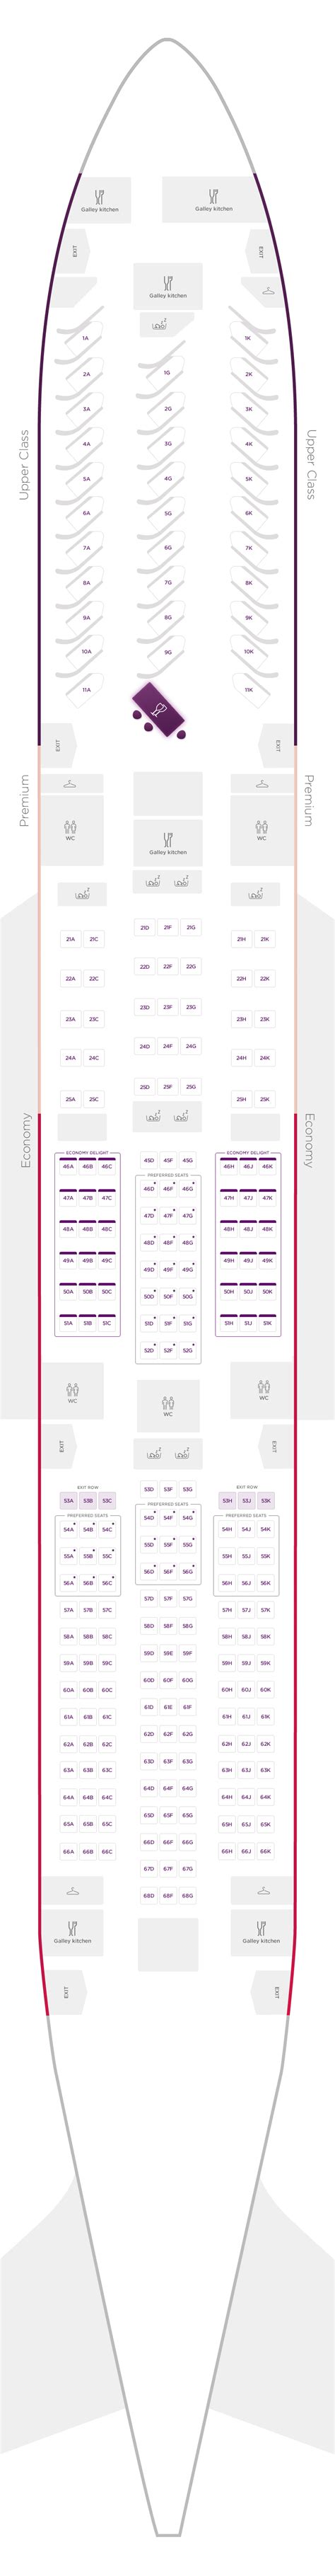 Boeing 787 9 Seat Map Virgin Atlantic Awesome Home